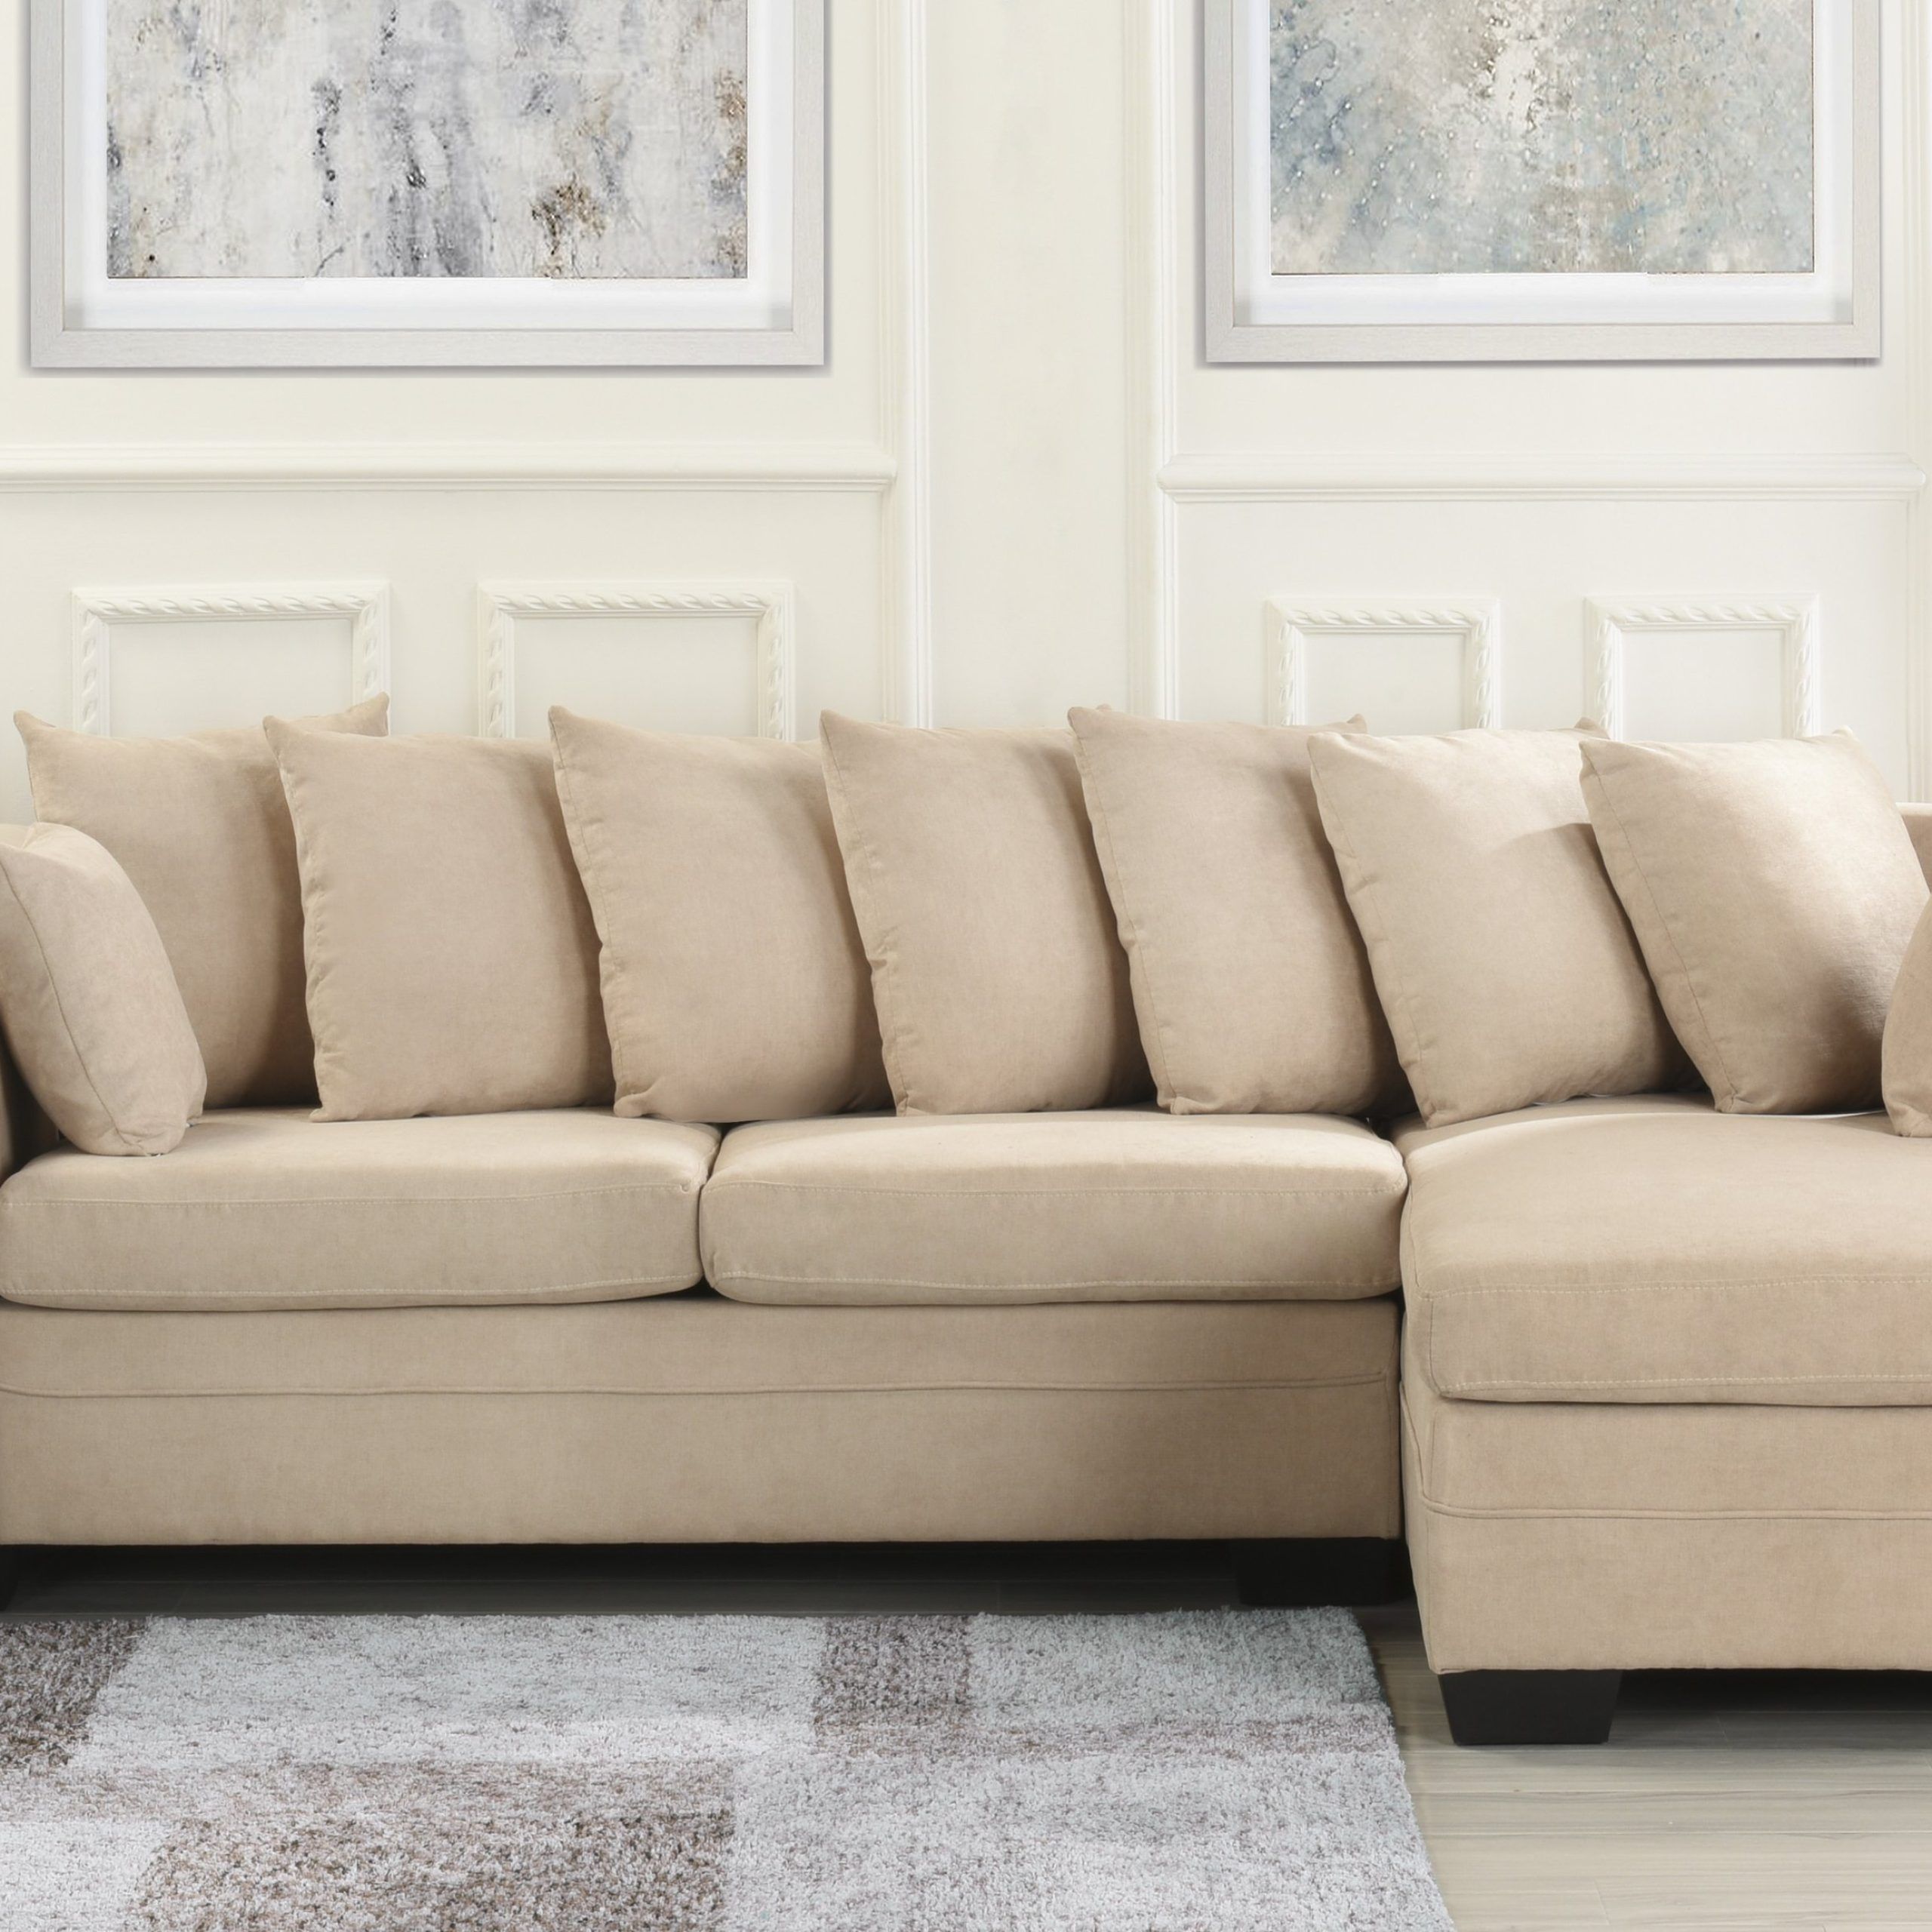 Large Brush Microfiber Sectional Sofa, L Shape Couch Extra Wide Chaise For Sofas In Beige (Gallery 18 of 20)